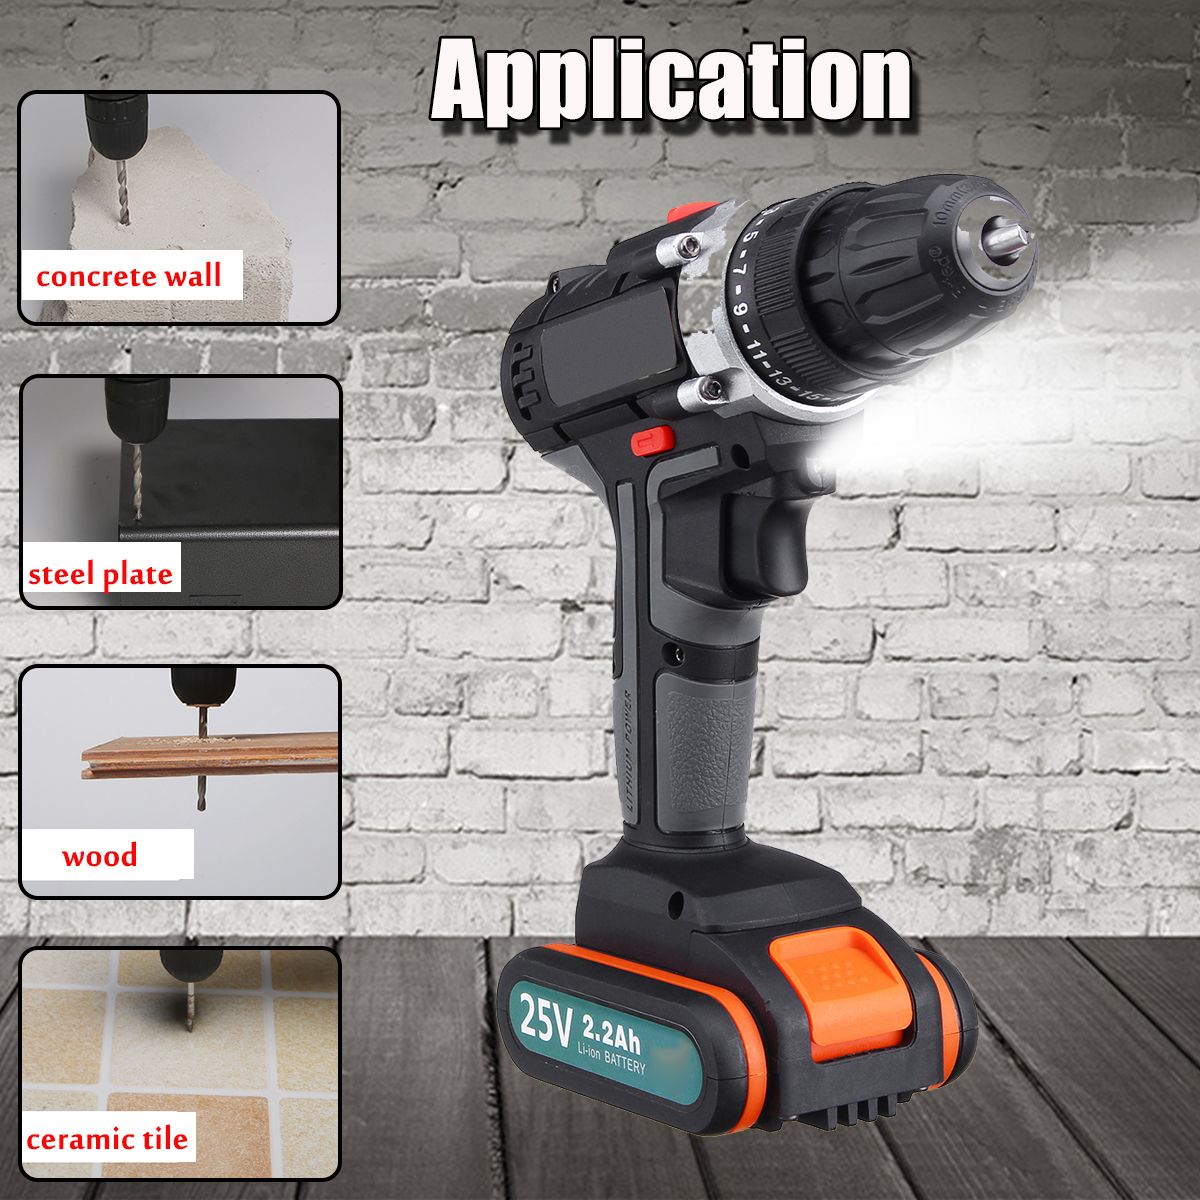 25V-Multifunctional-Electric-Drill-High-Power-Household-Electric-Screwdriver-22Ah-Lithium-Battery-Po-1434310